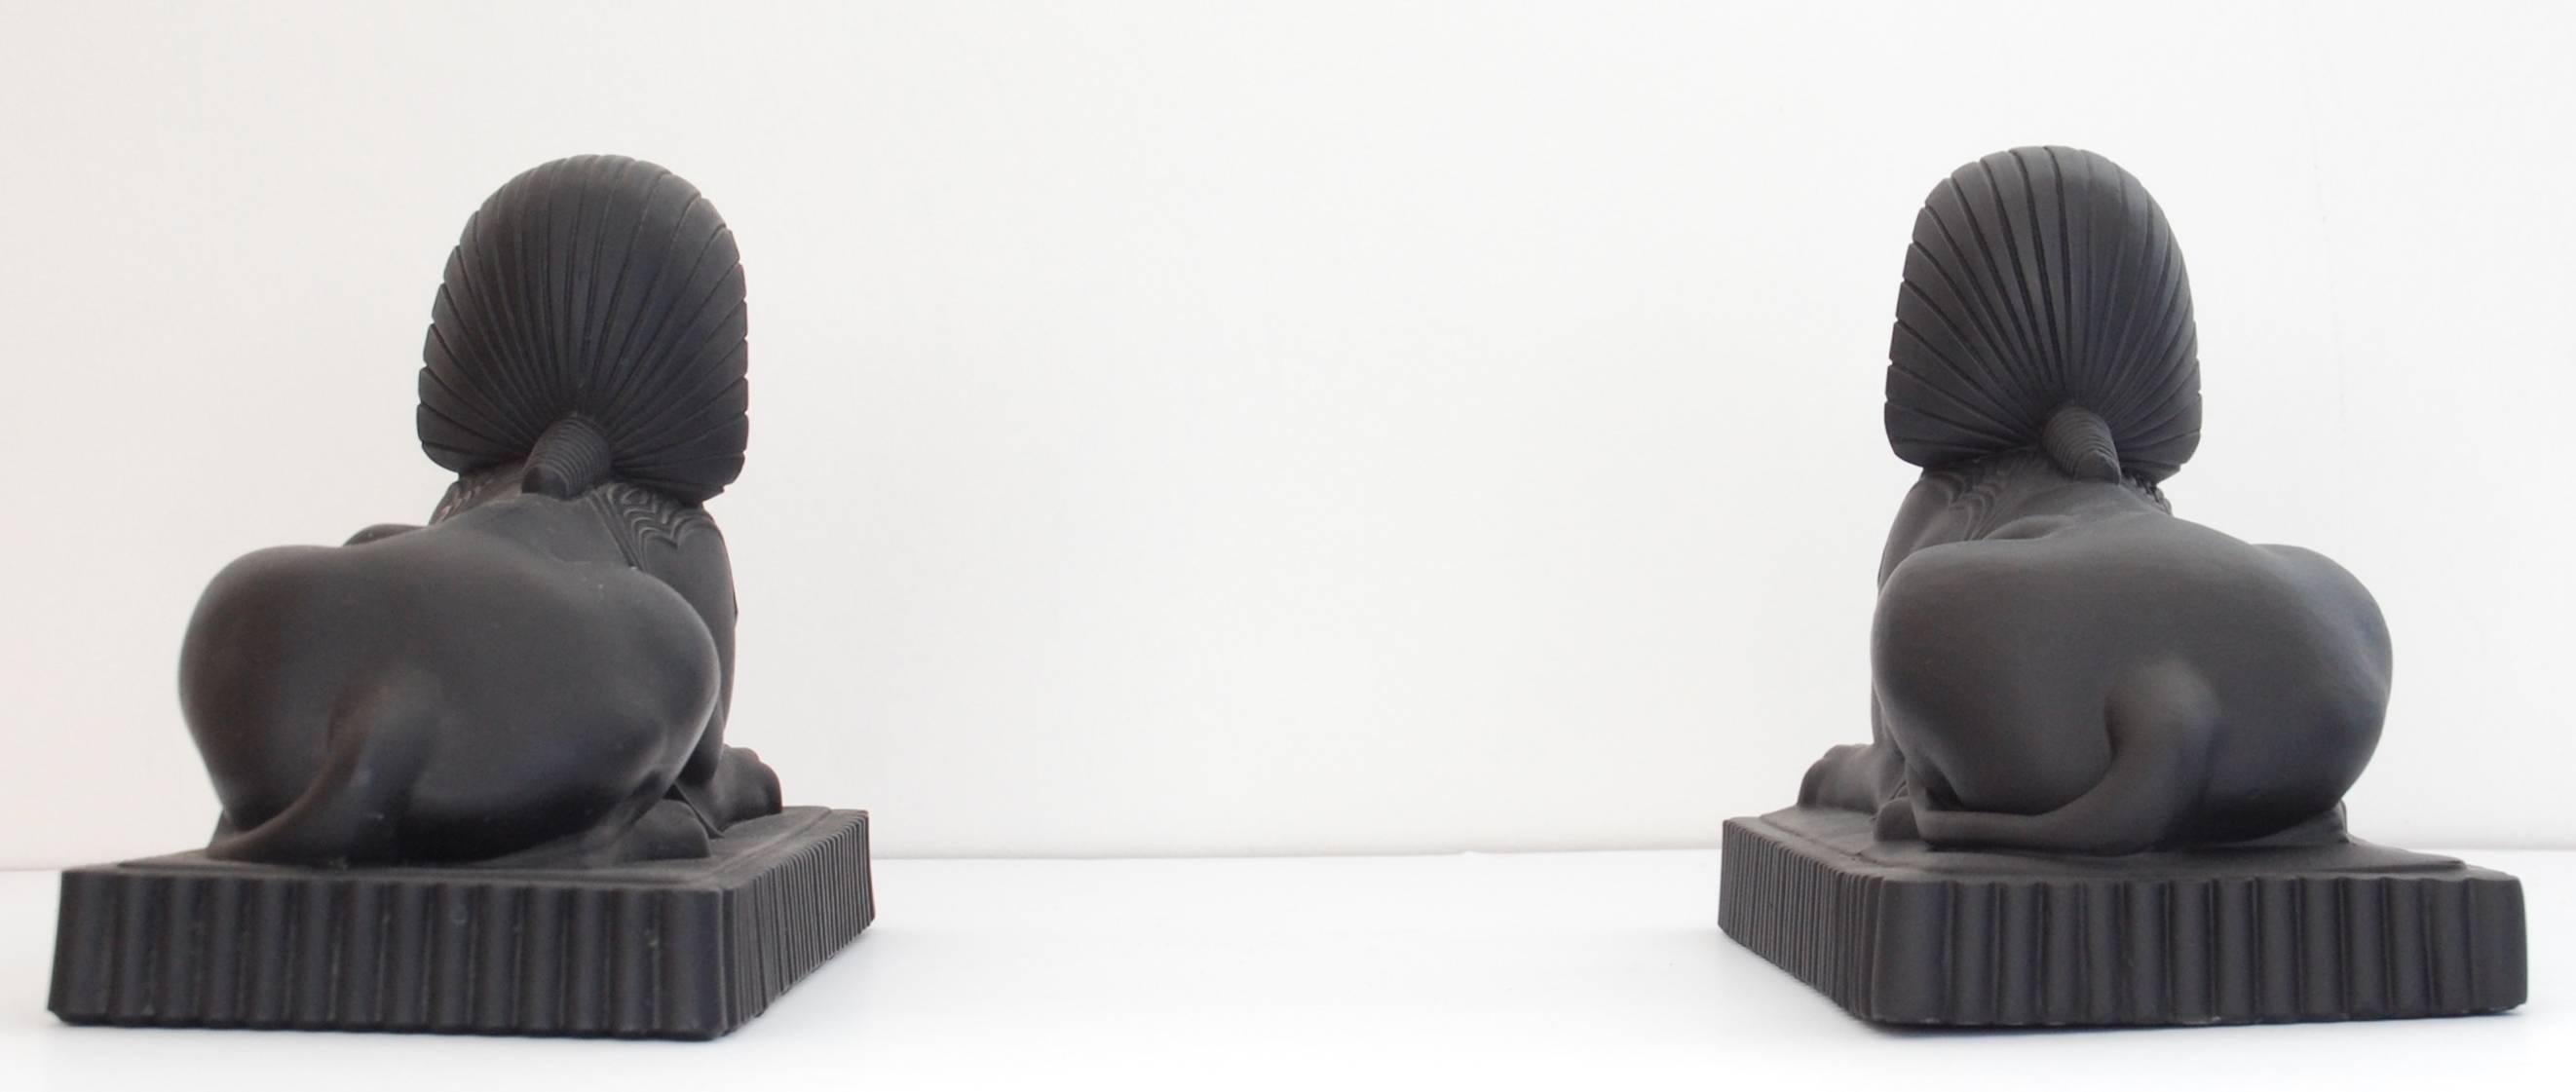 Neoclassical Revival Pair of Black Glass Sphinxes, Molineaux & Webb, circa 1875 For Sale